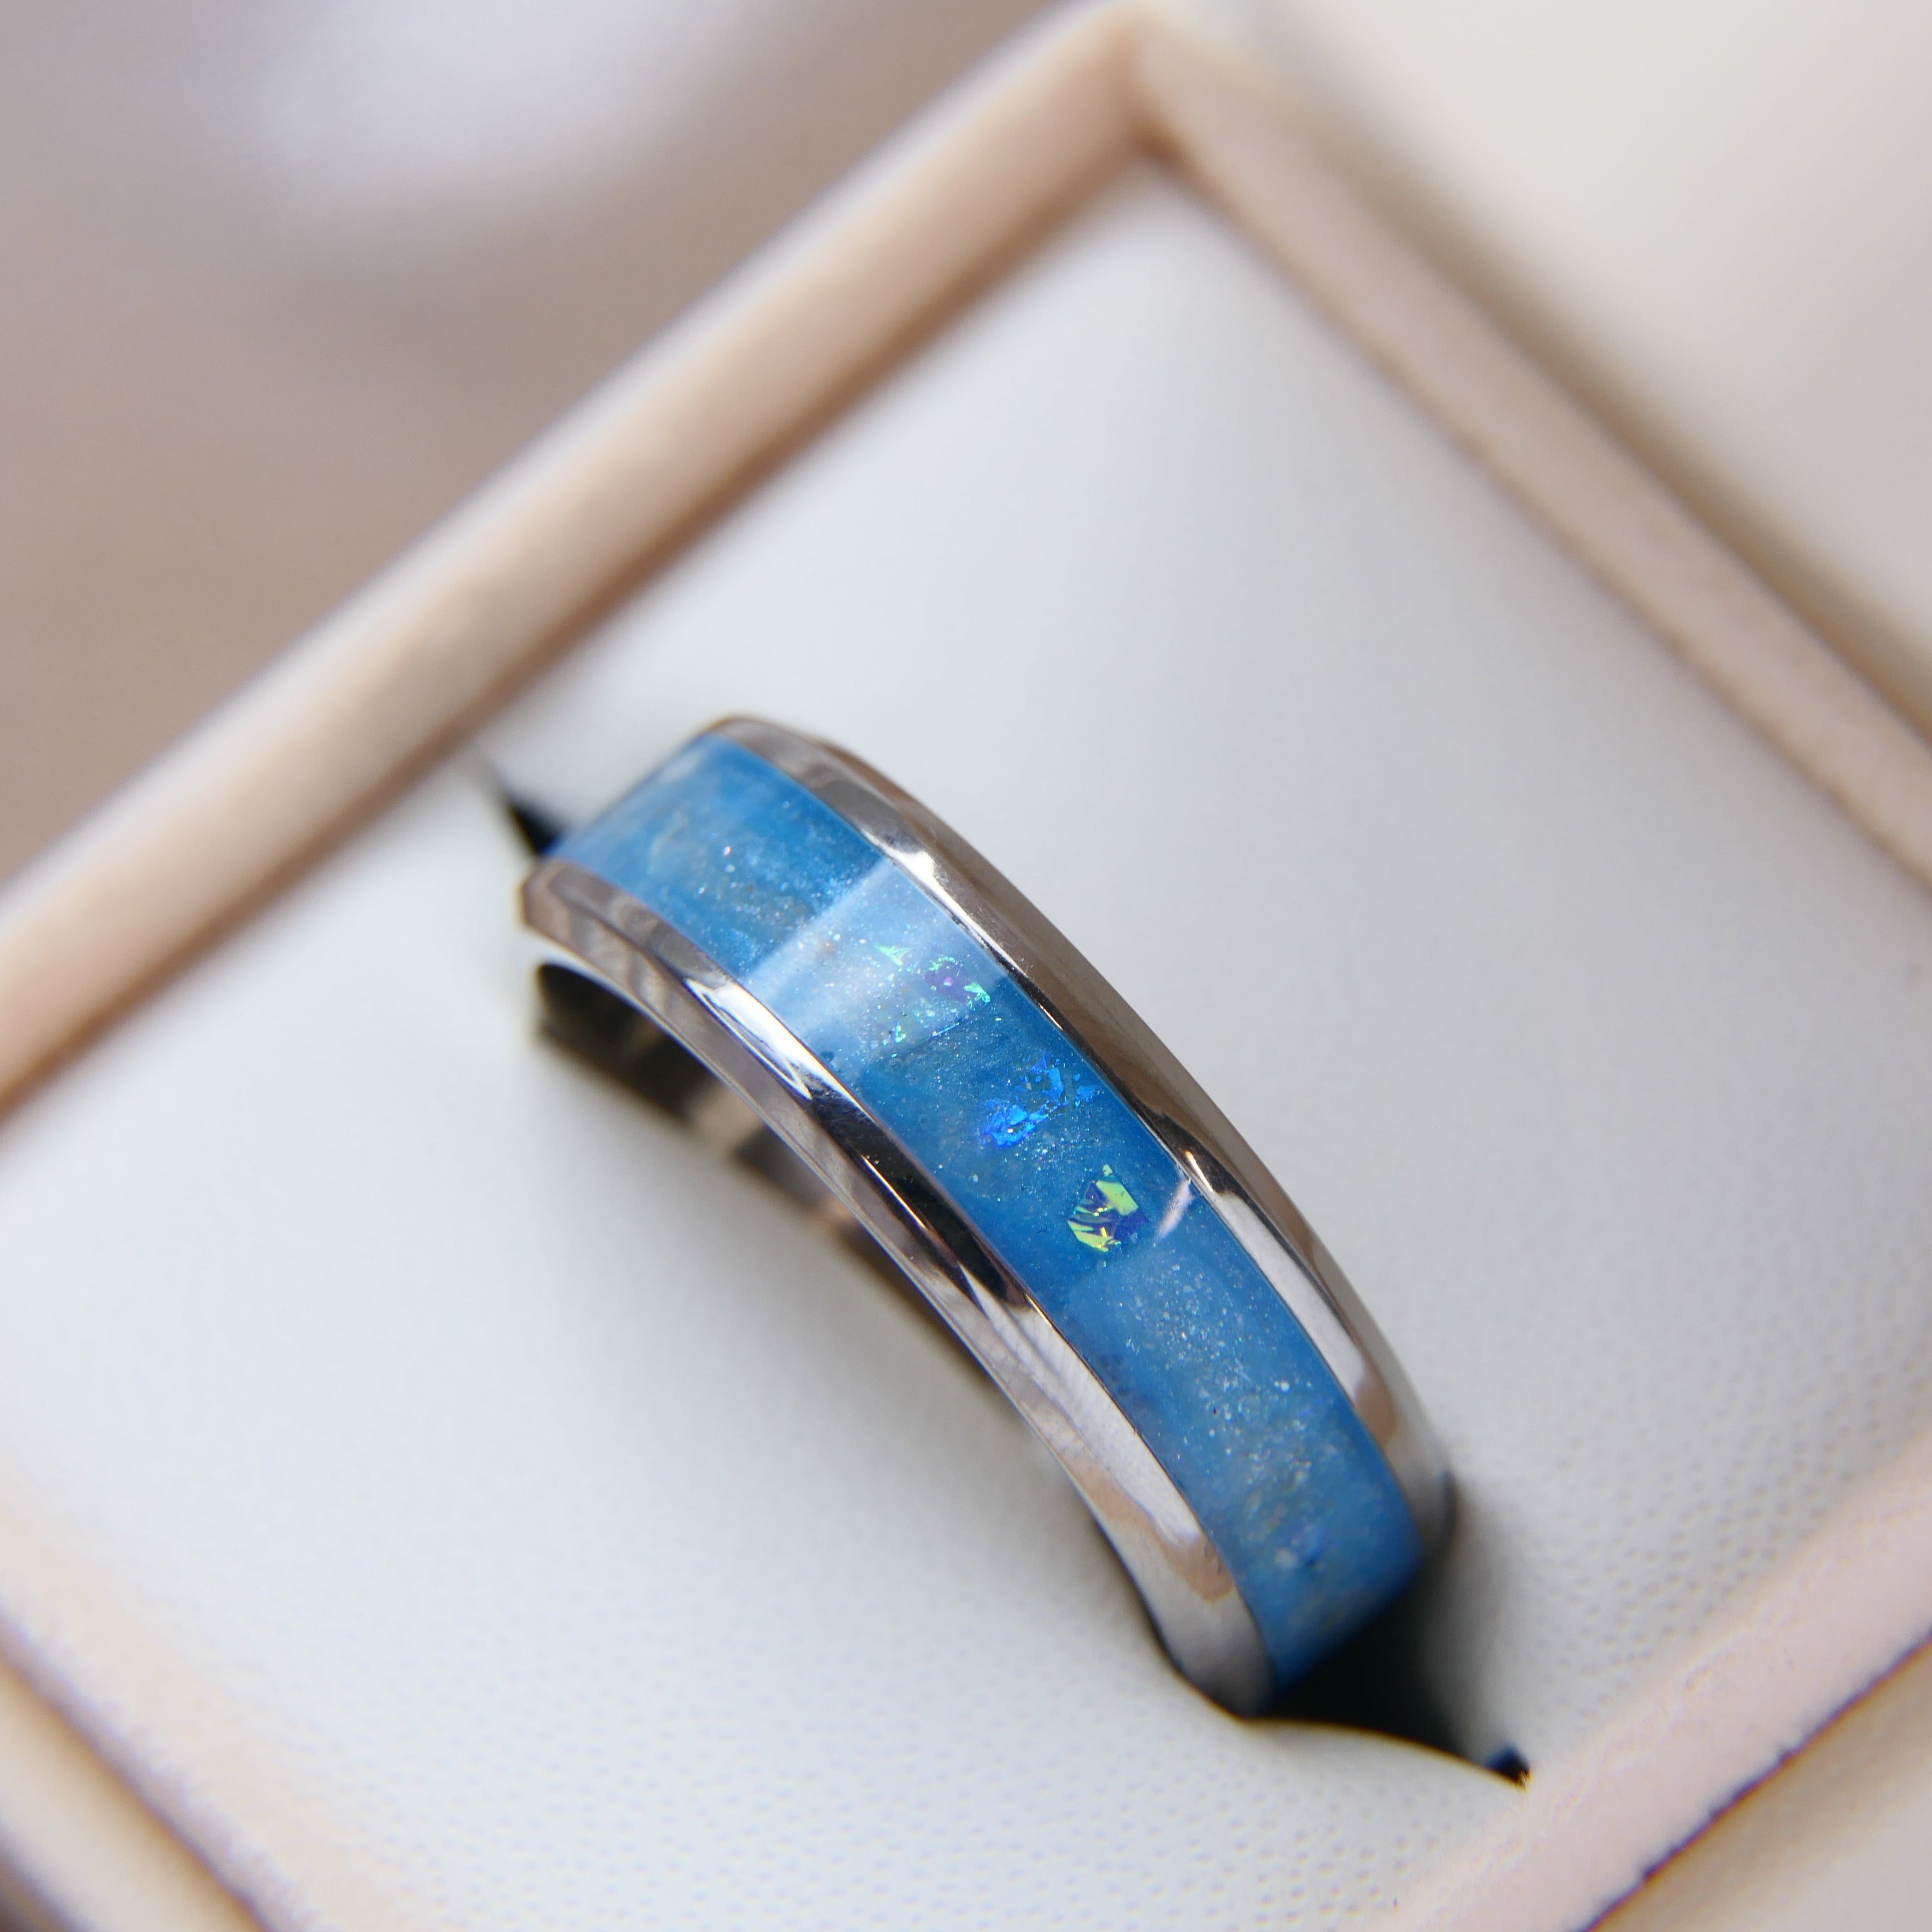 cremation keepsake ring with light blue shimmer, ashes and opalescent flecks